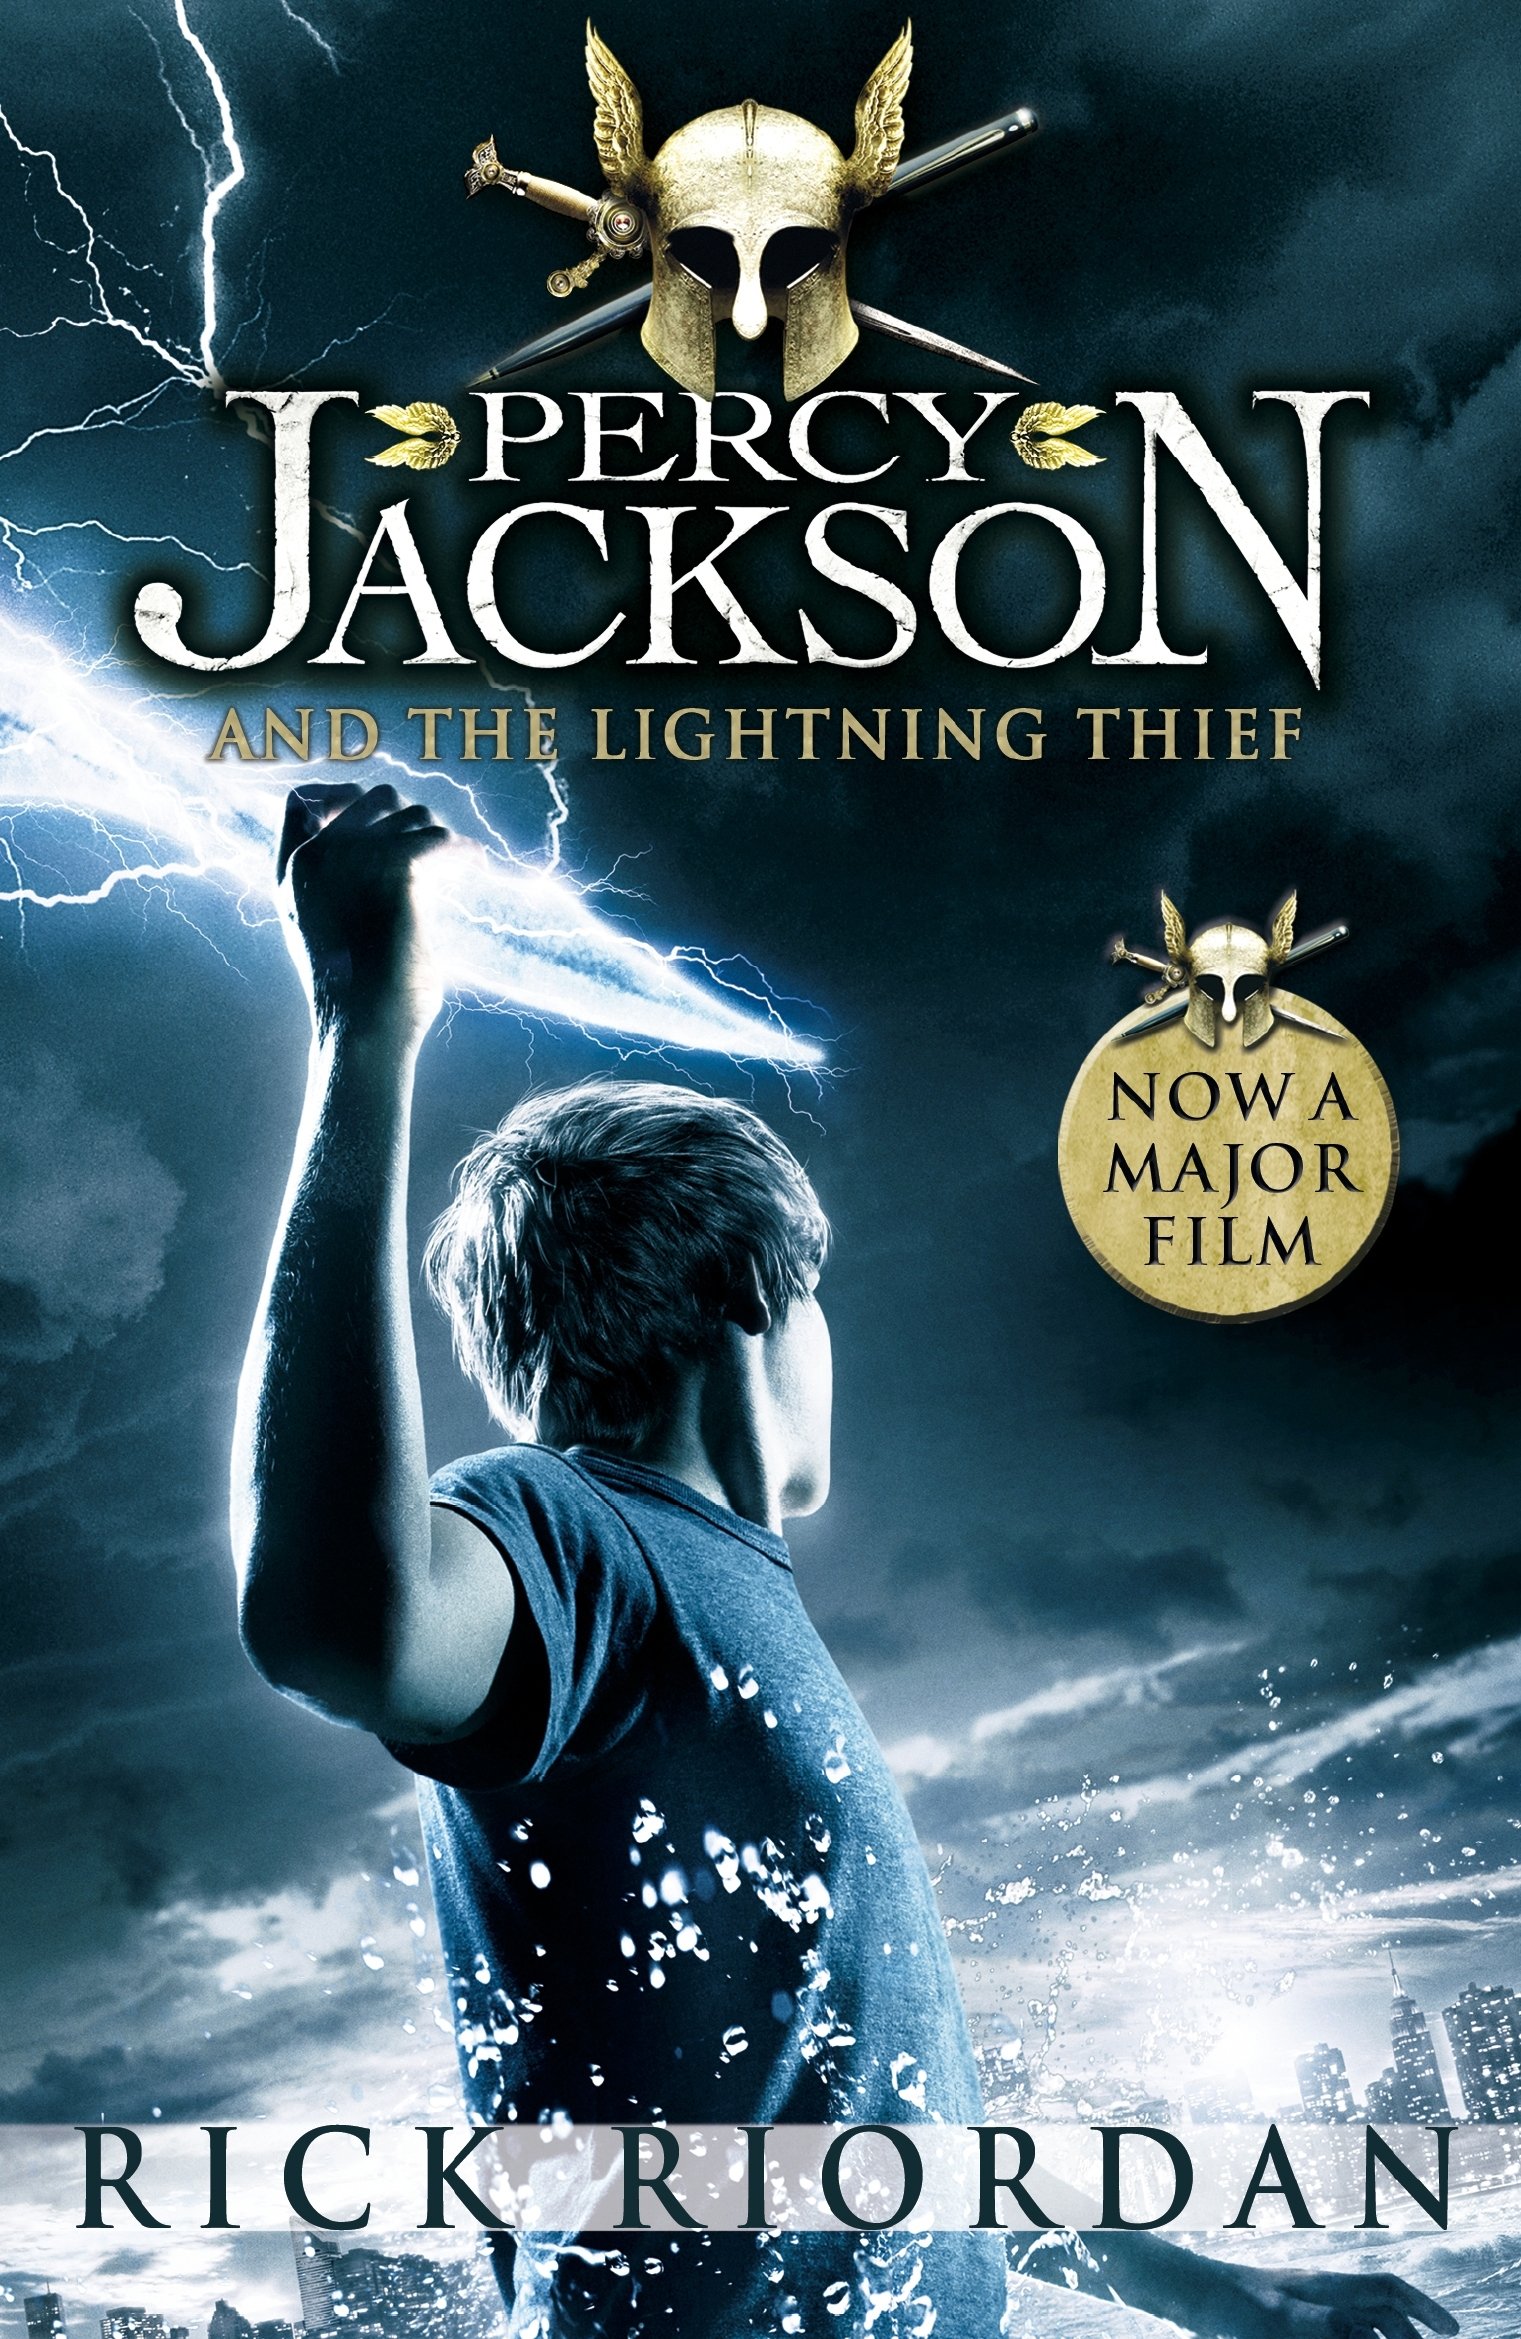 Percy Jackson and the Lightning Thief (Book 1) - The Rocketship Bookshop